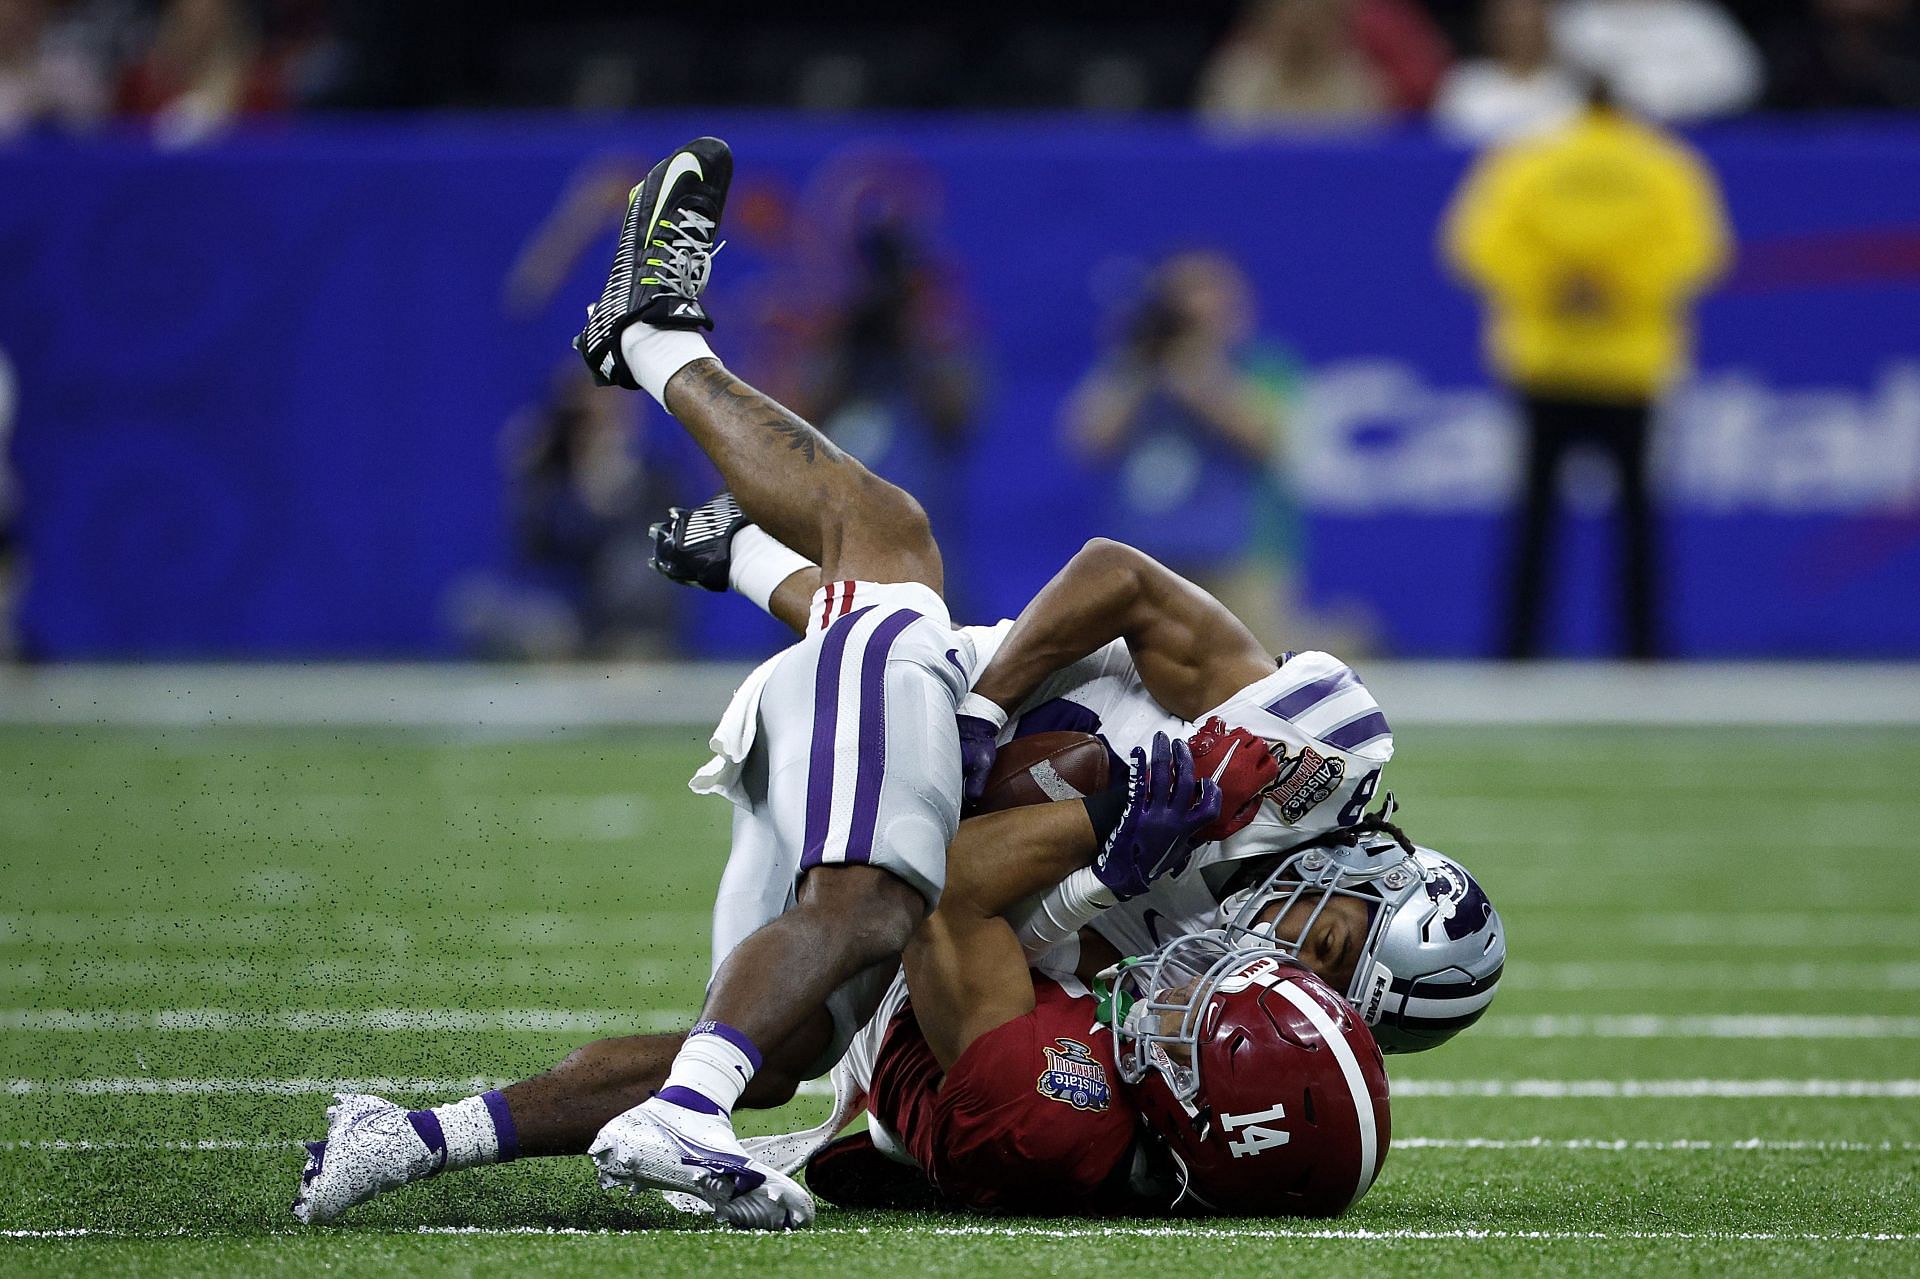 Phillip Brooks #8 of the Kansas State Wildcats is tackled by Brian Branch